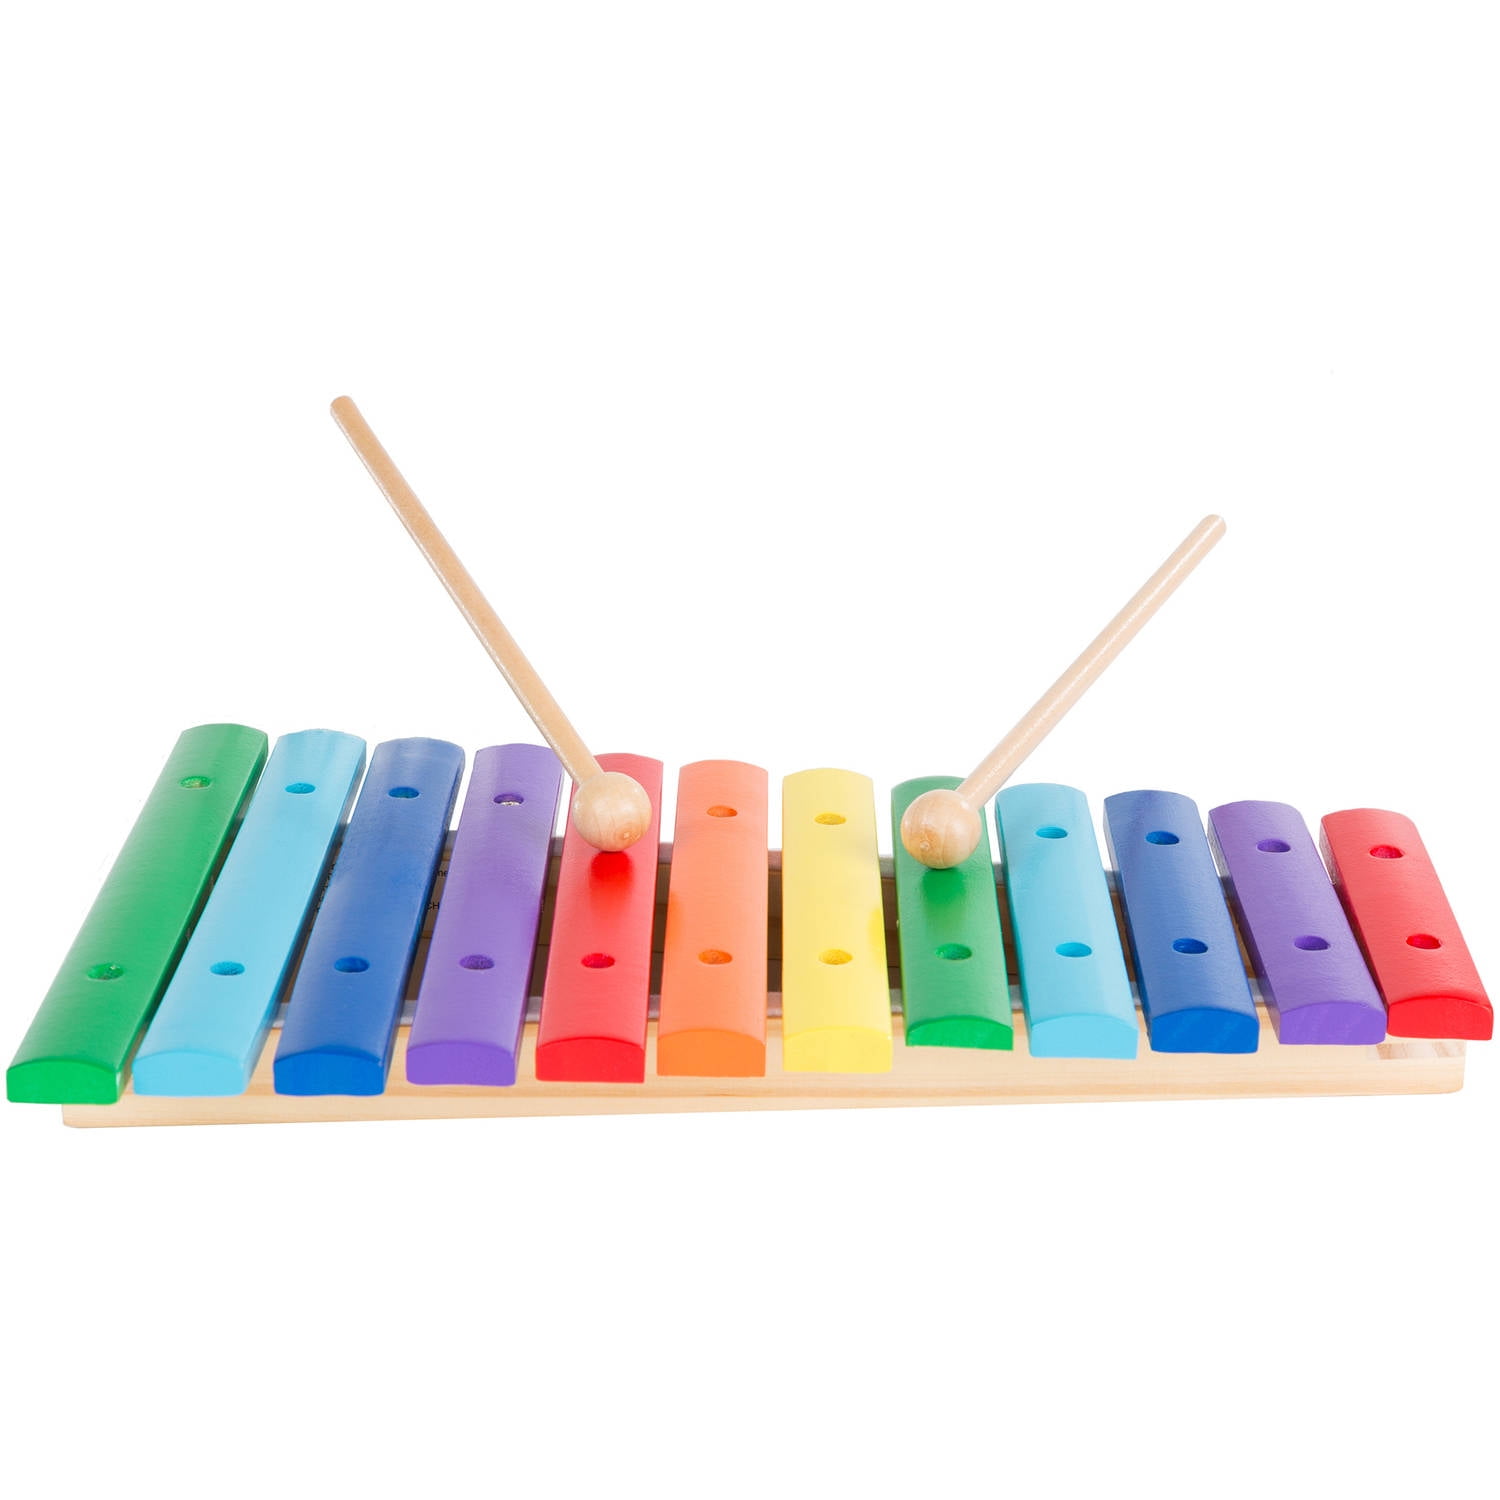 US 10x Wooden Toddler Musical Percussion Xylophone Instrument Toy Band Colorful 